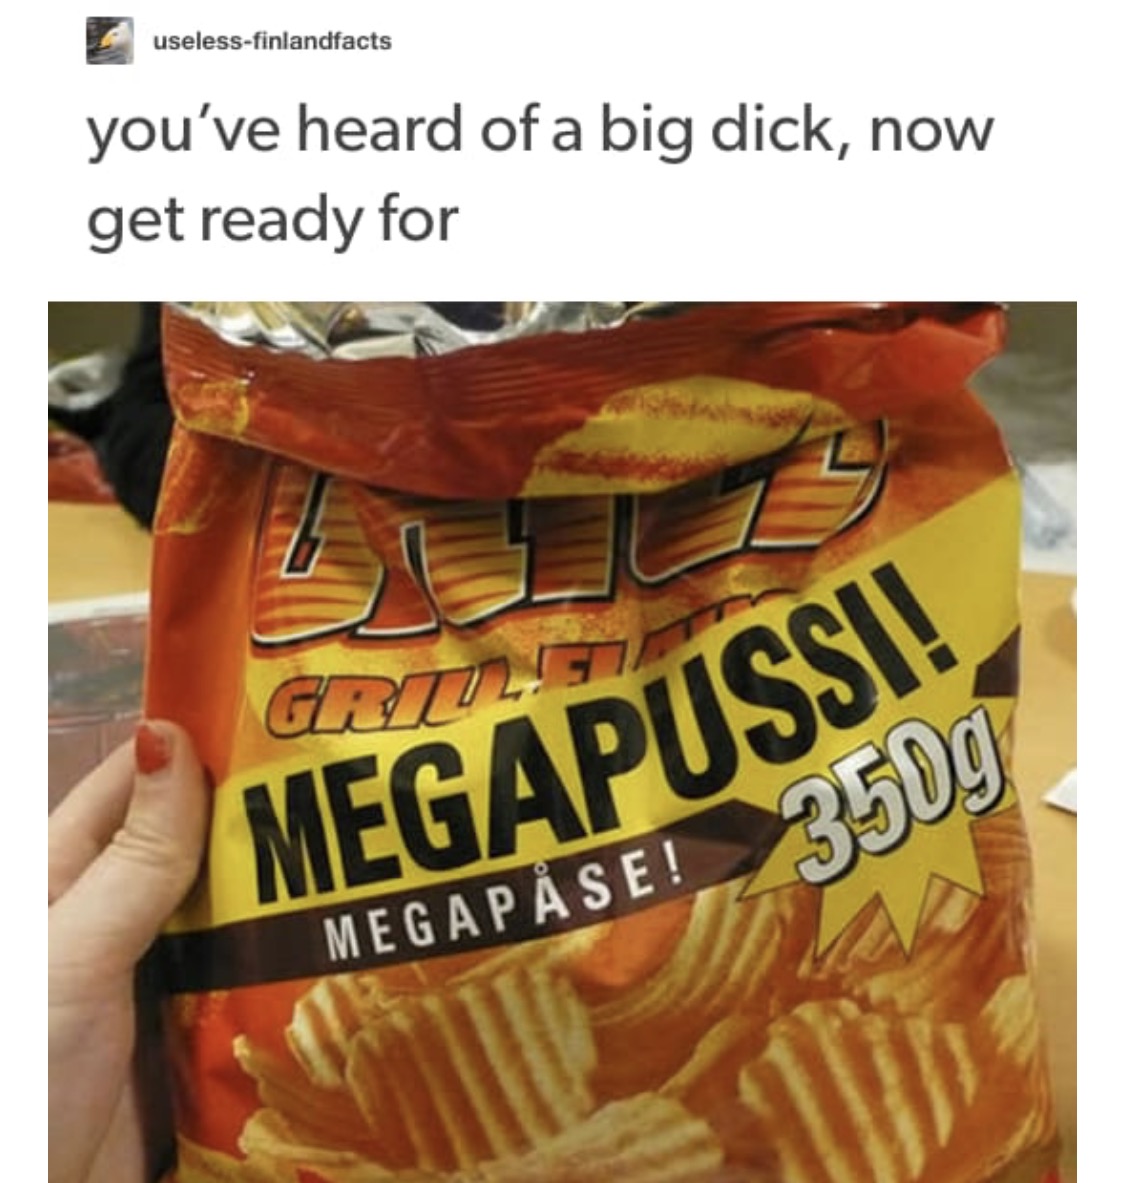 meme - inappropriate memes - uselessfinlandfacts you've heard of a big dick, now get ready for Megapussi! Mega P Se!